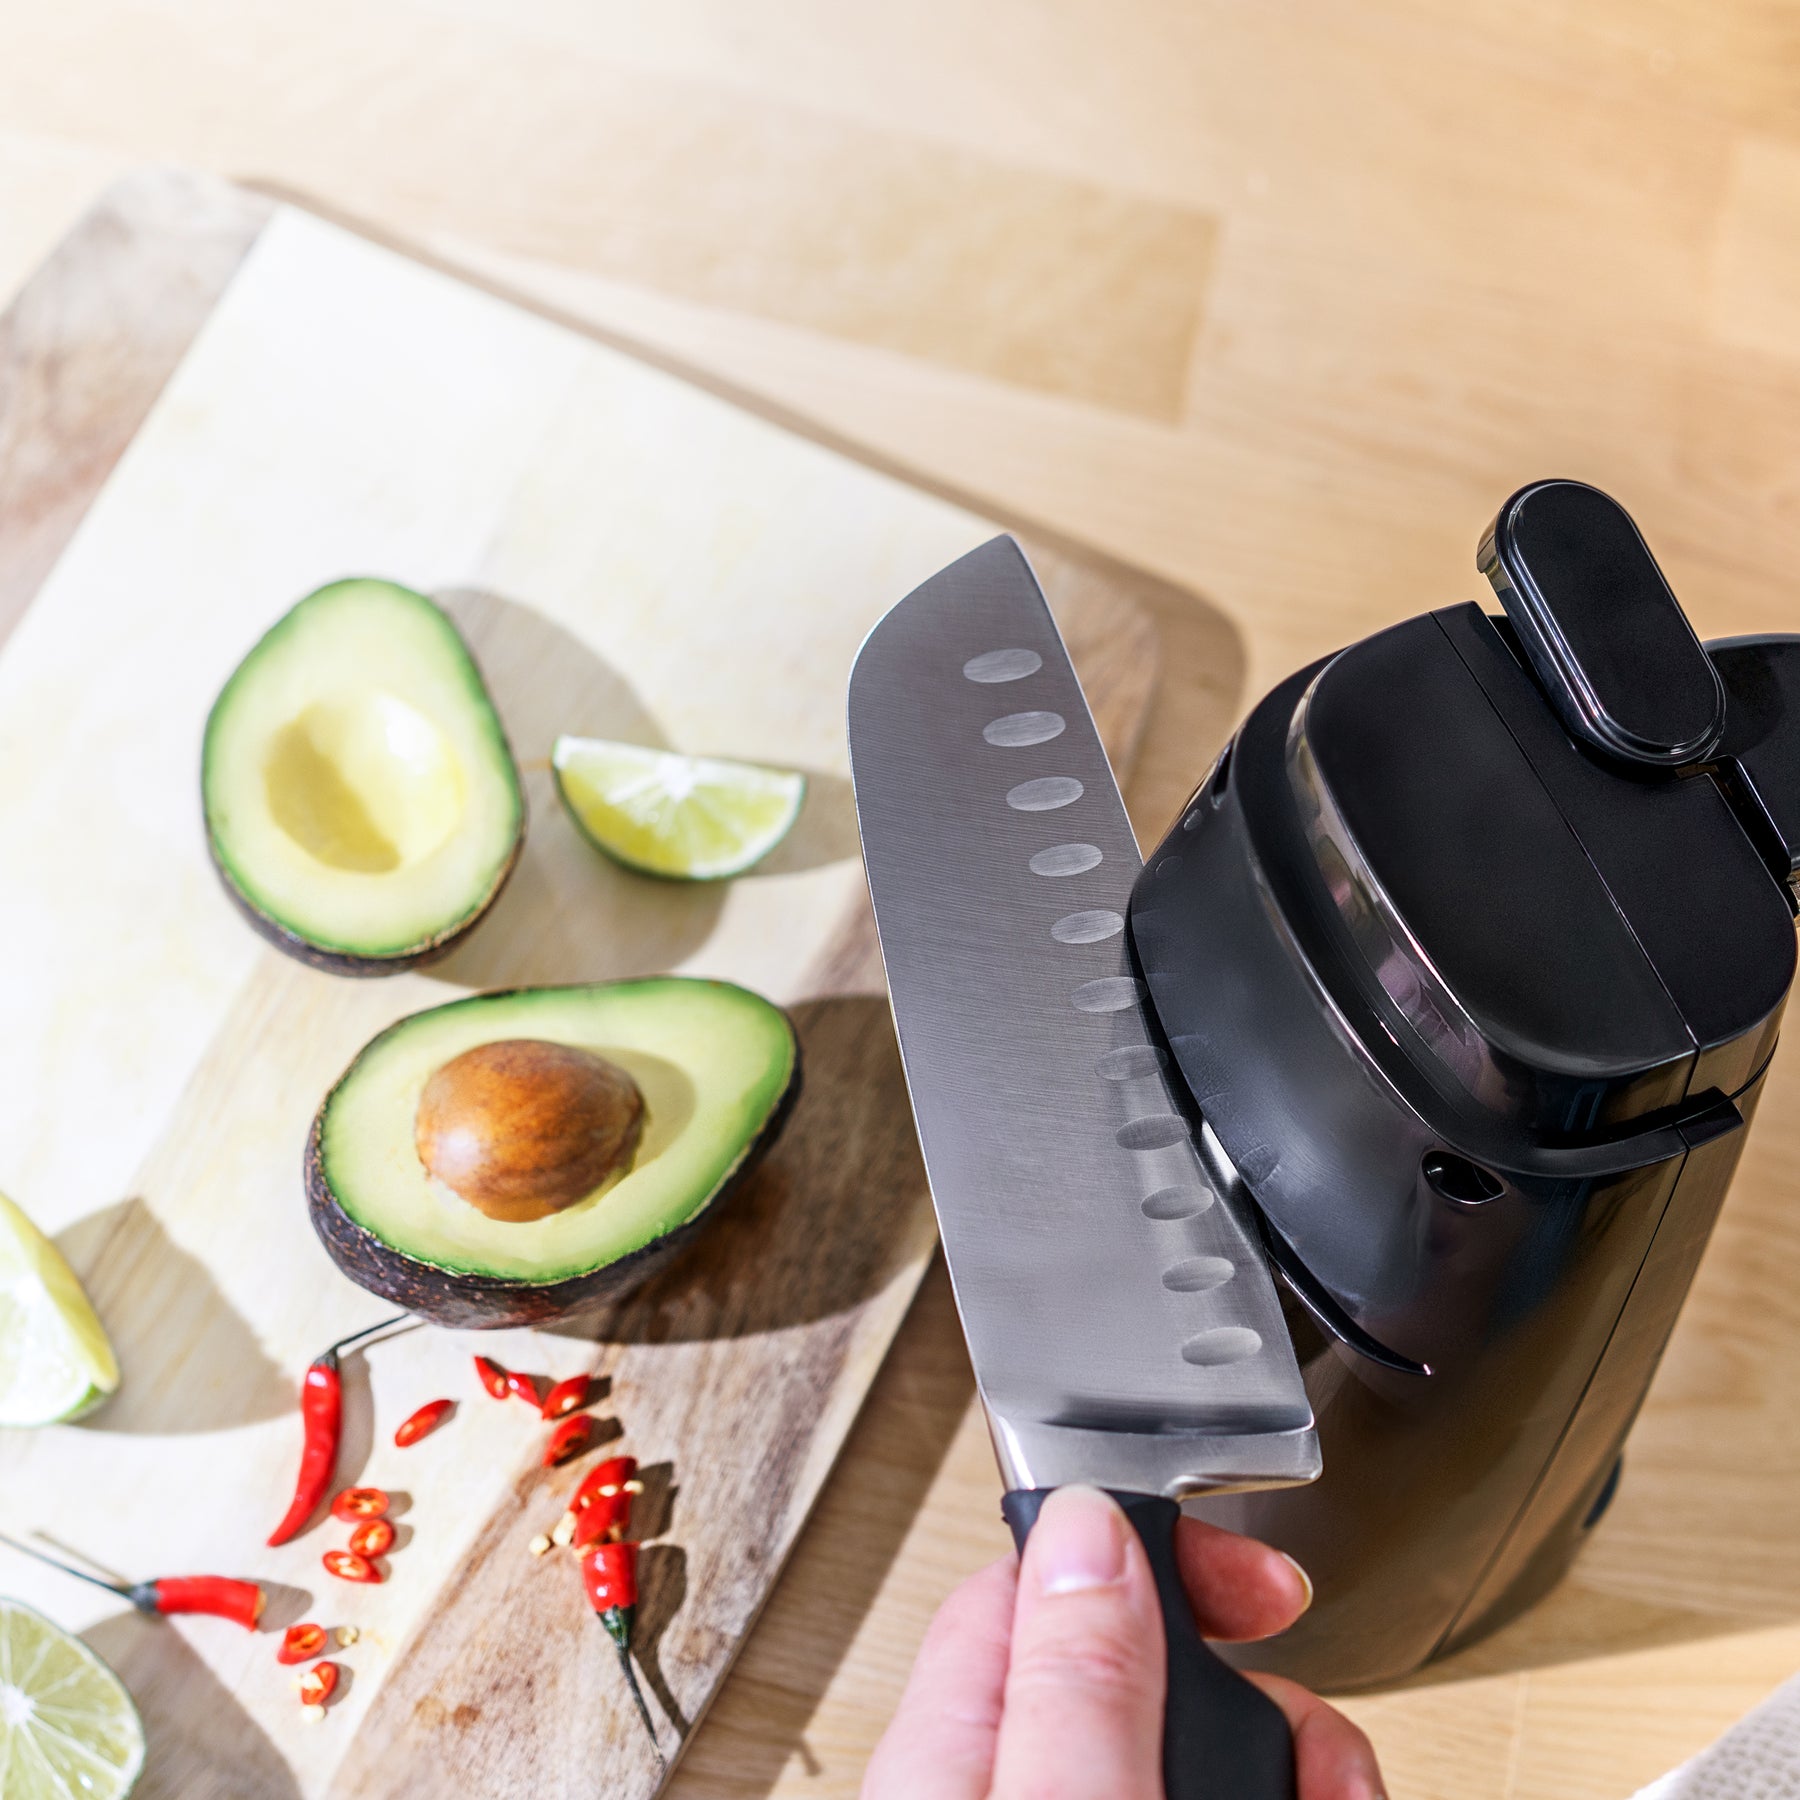 NOCO® Can Master Pro Electric Can Opener – Home Hero Shop